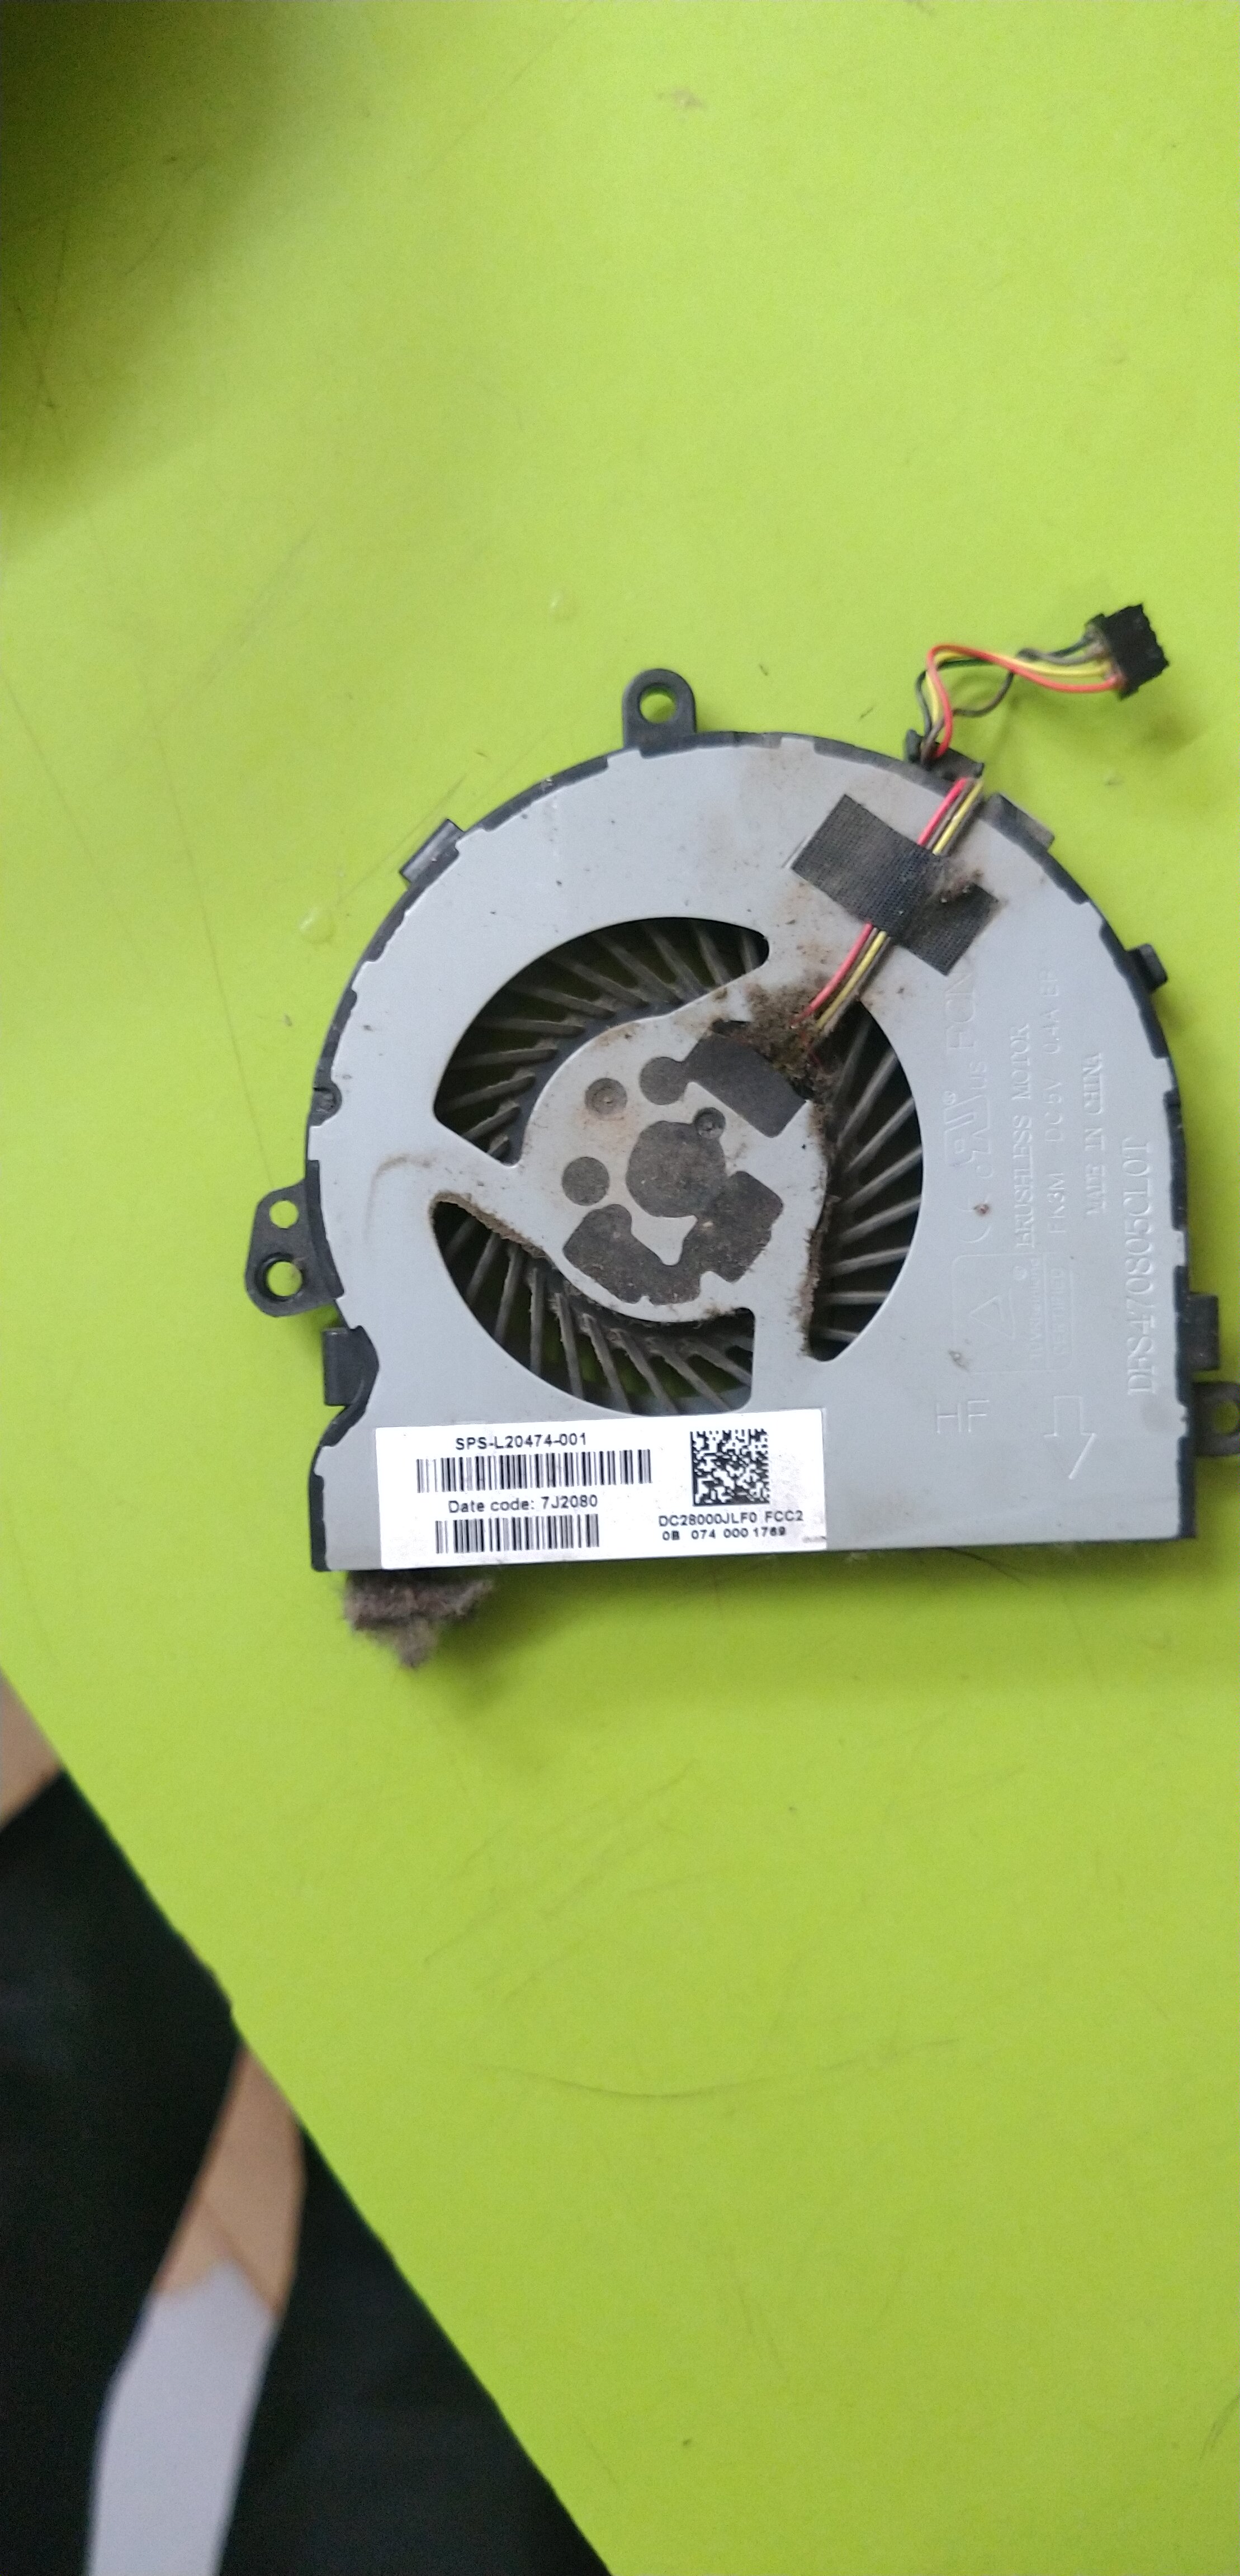 hp 15q-ds00 heatsink problem repairing centre in chennai,h25,annanager(E),4th mainroad,chennai-102,Services,Free Classifieds,Post Free Ads,77traders.com